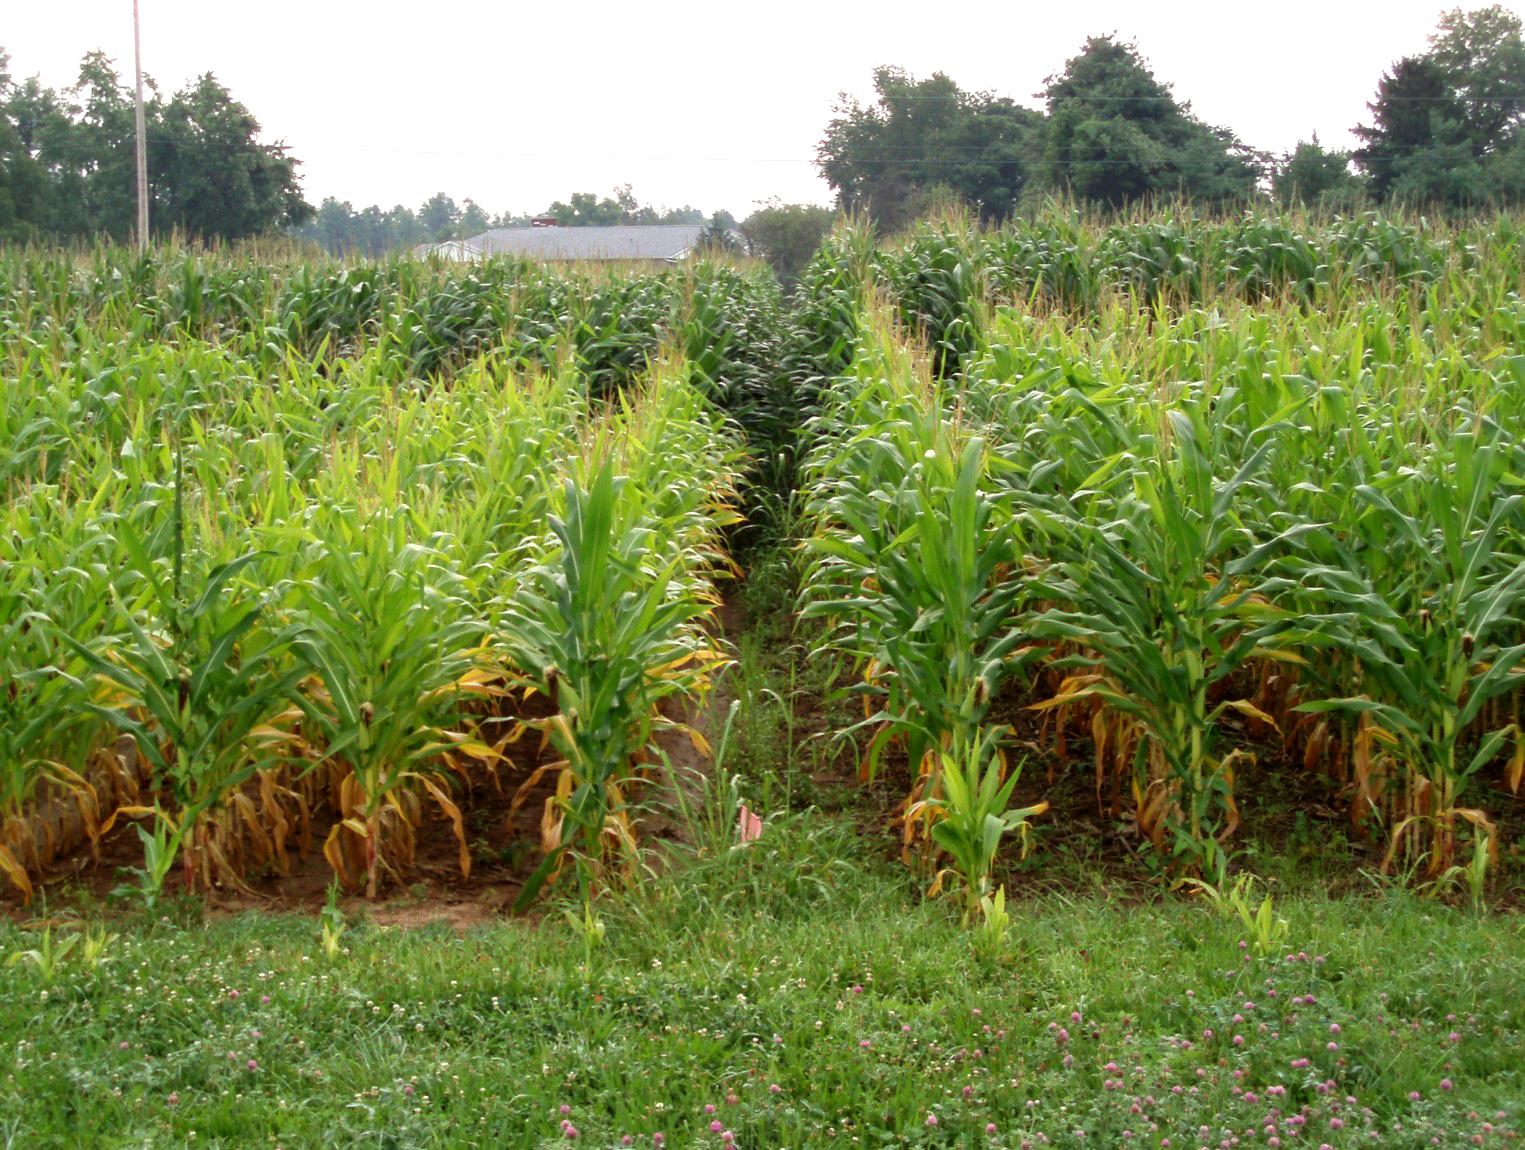 Corn growing at the Blevins research plots. Photo by John Grove, UK soil scientist.